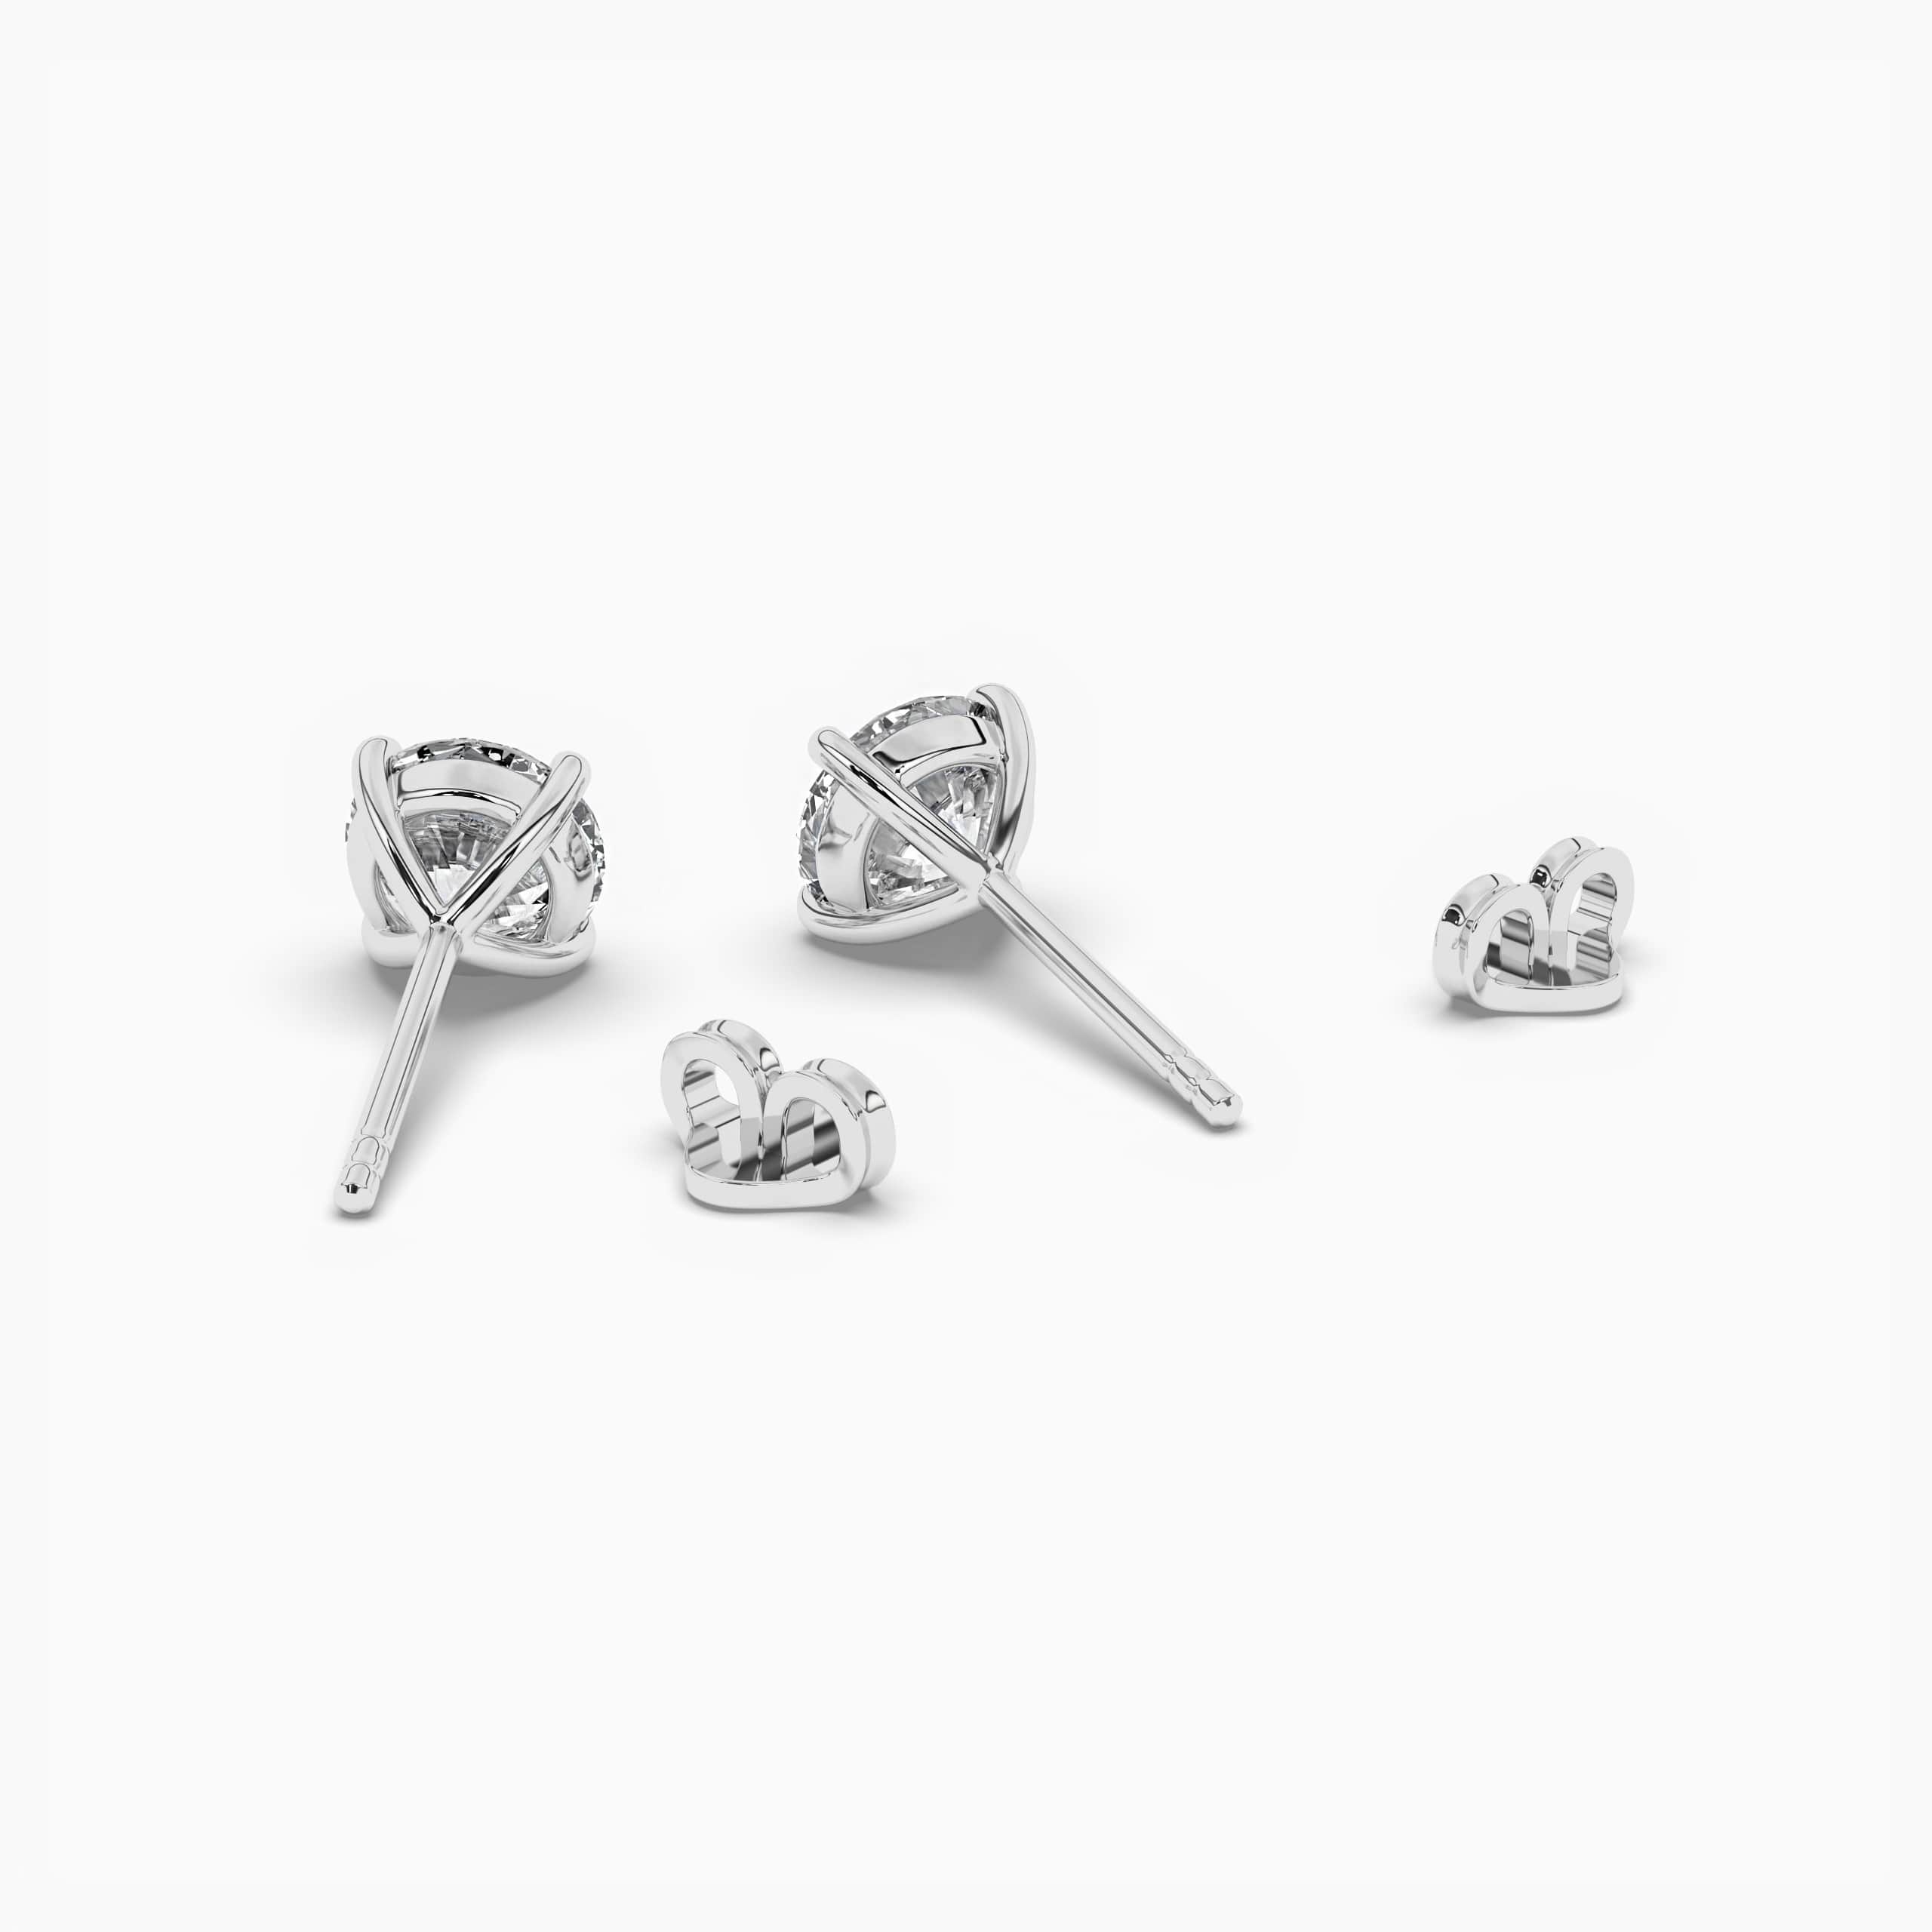 Round Cut Diamond Solitaire Stud Earrings in White Gold